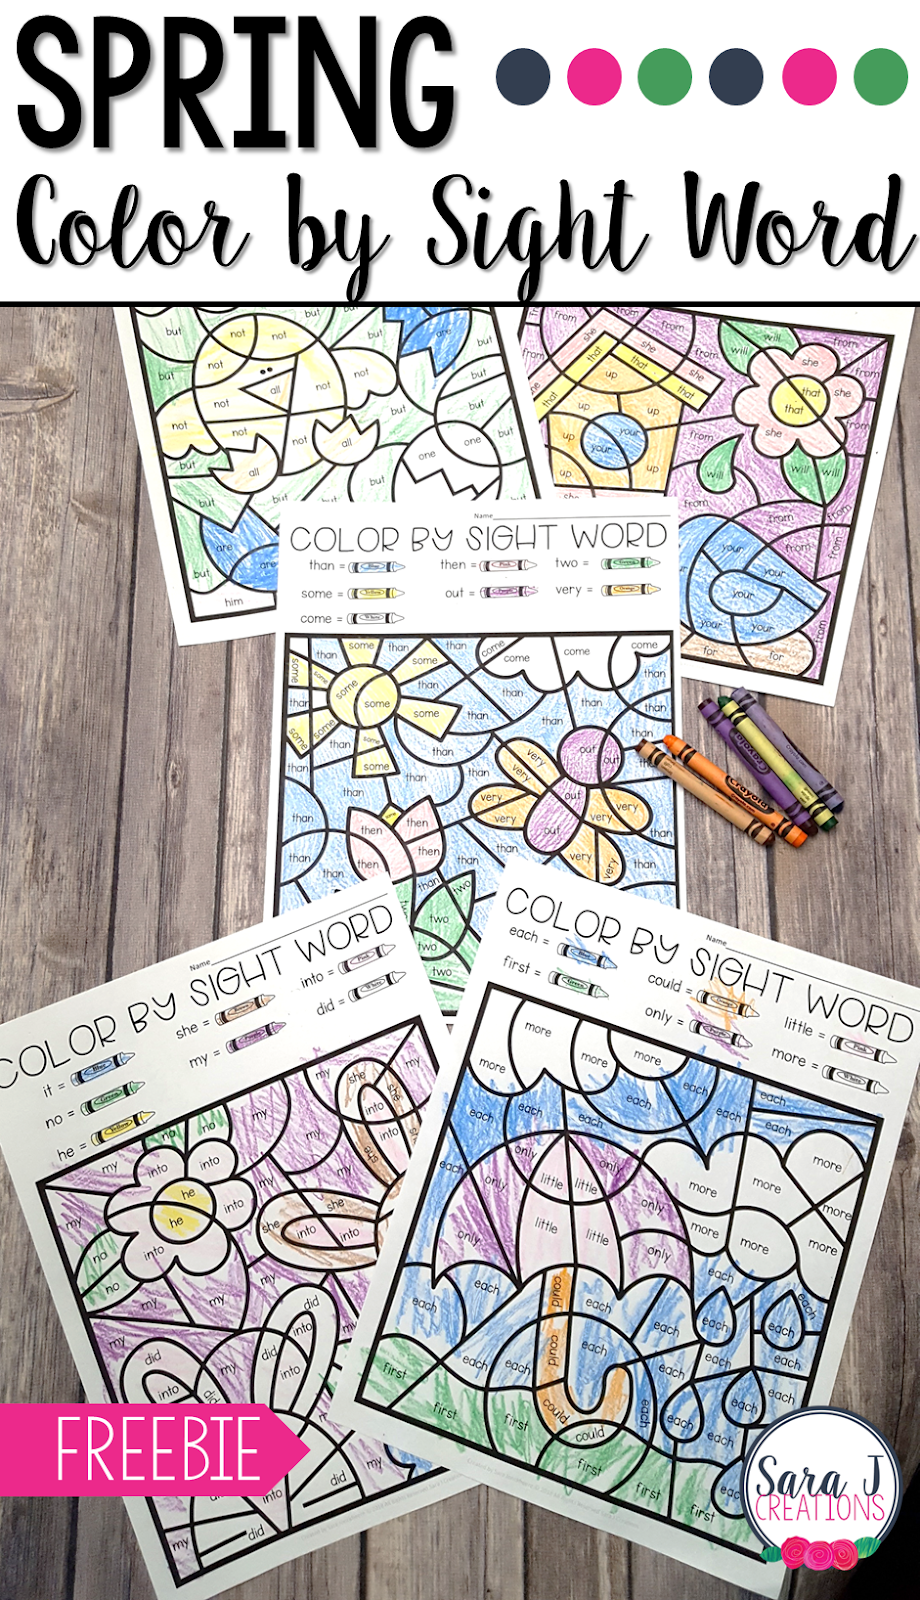 Download Spring Color by Sight Word | Sara J Creations